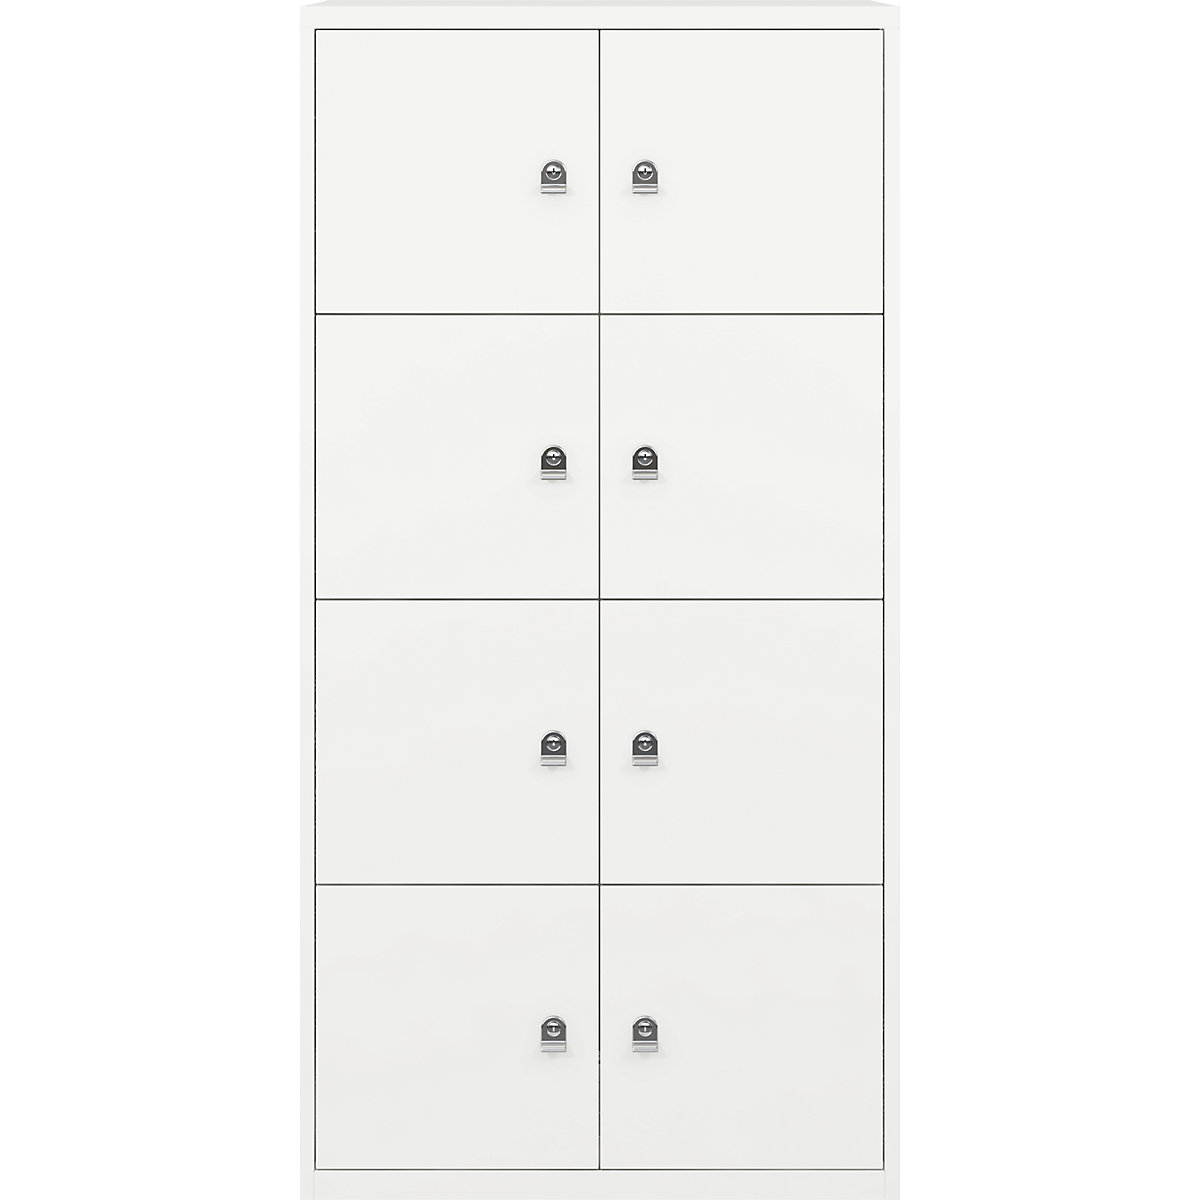 Armoire à casiers LateralFile™ – BISLEY, 8 casiers hauteur 375 mm, blanc trafic-2